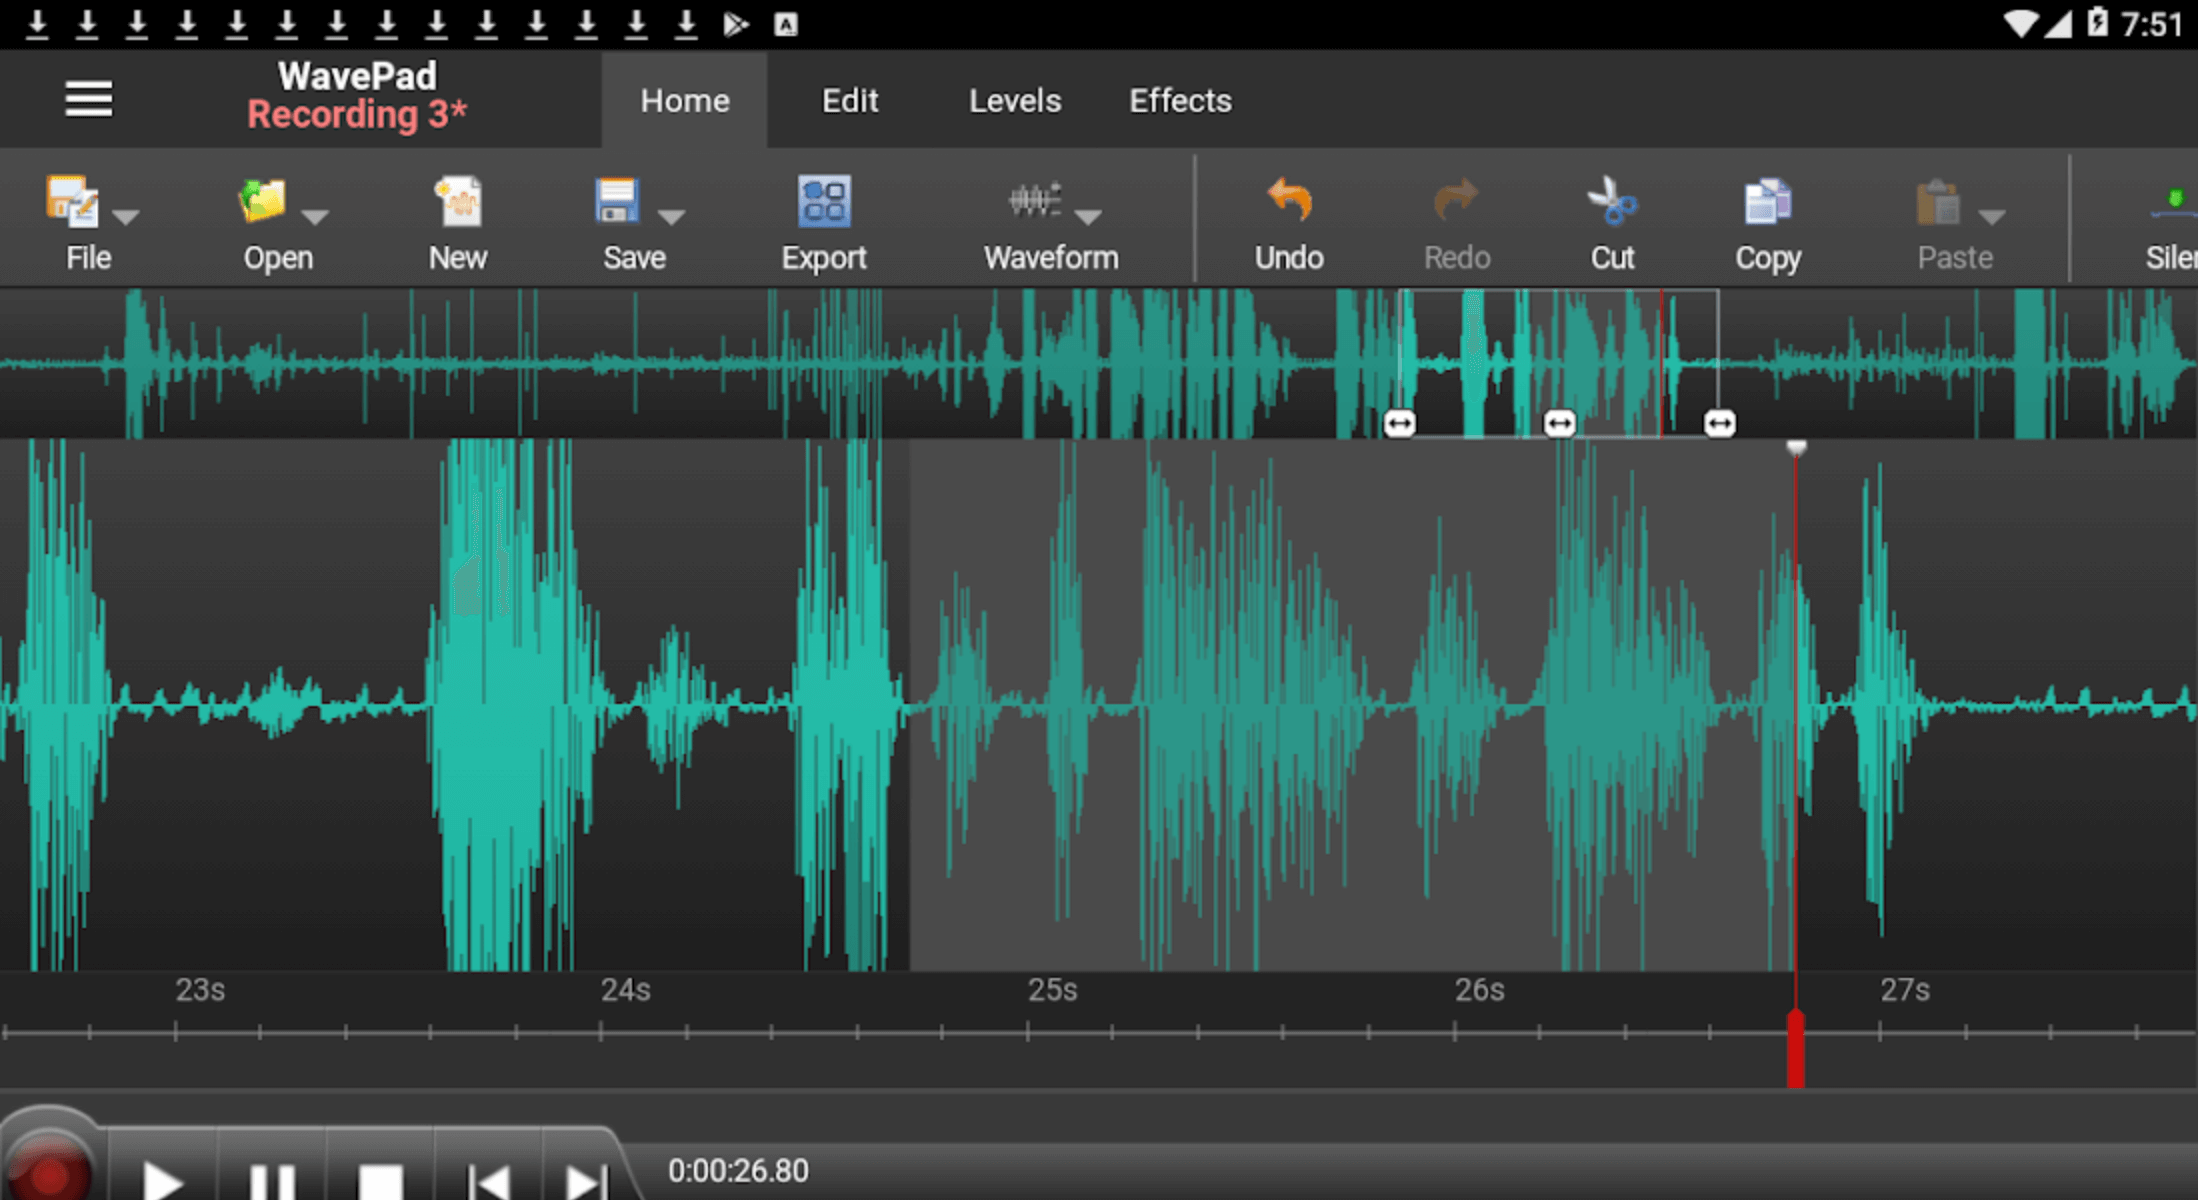 audio editor for Android - WavePad